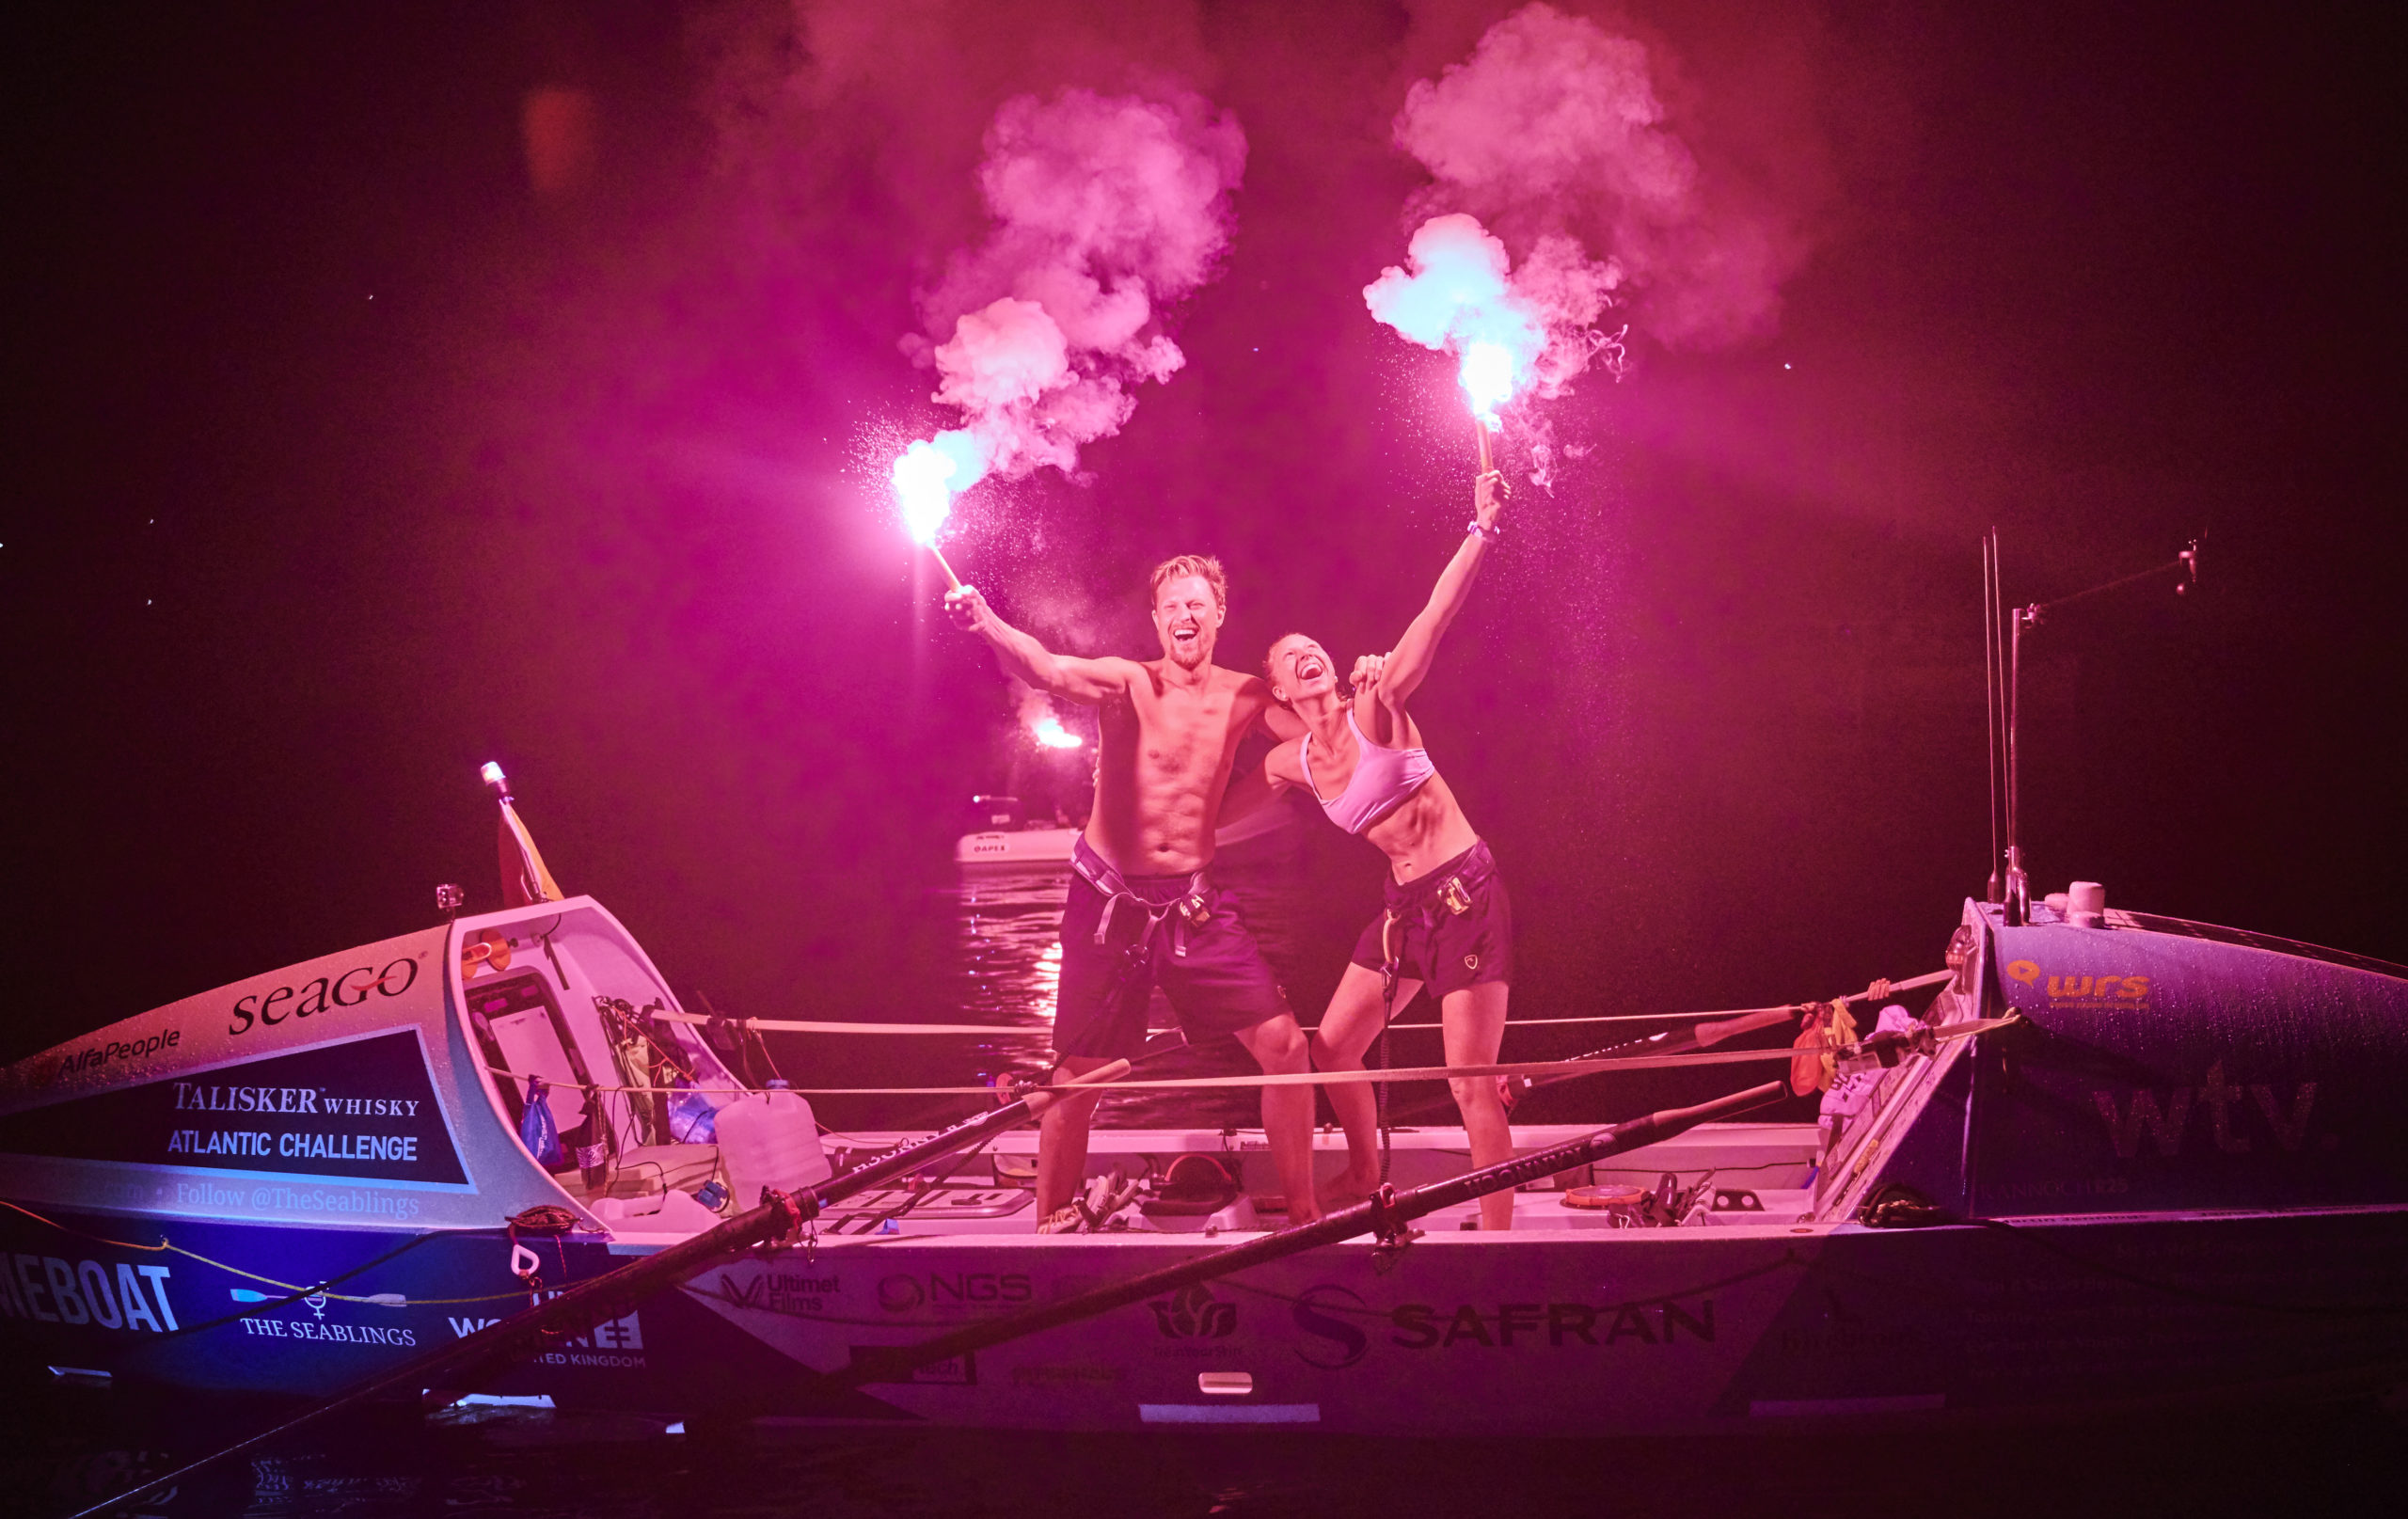 Anna and Cam McLean celebrate finishing their row across the Atlantic by lighting flares